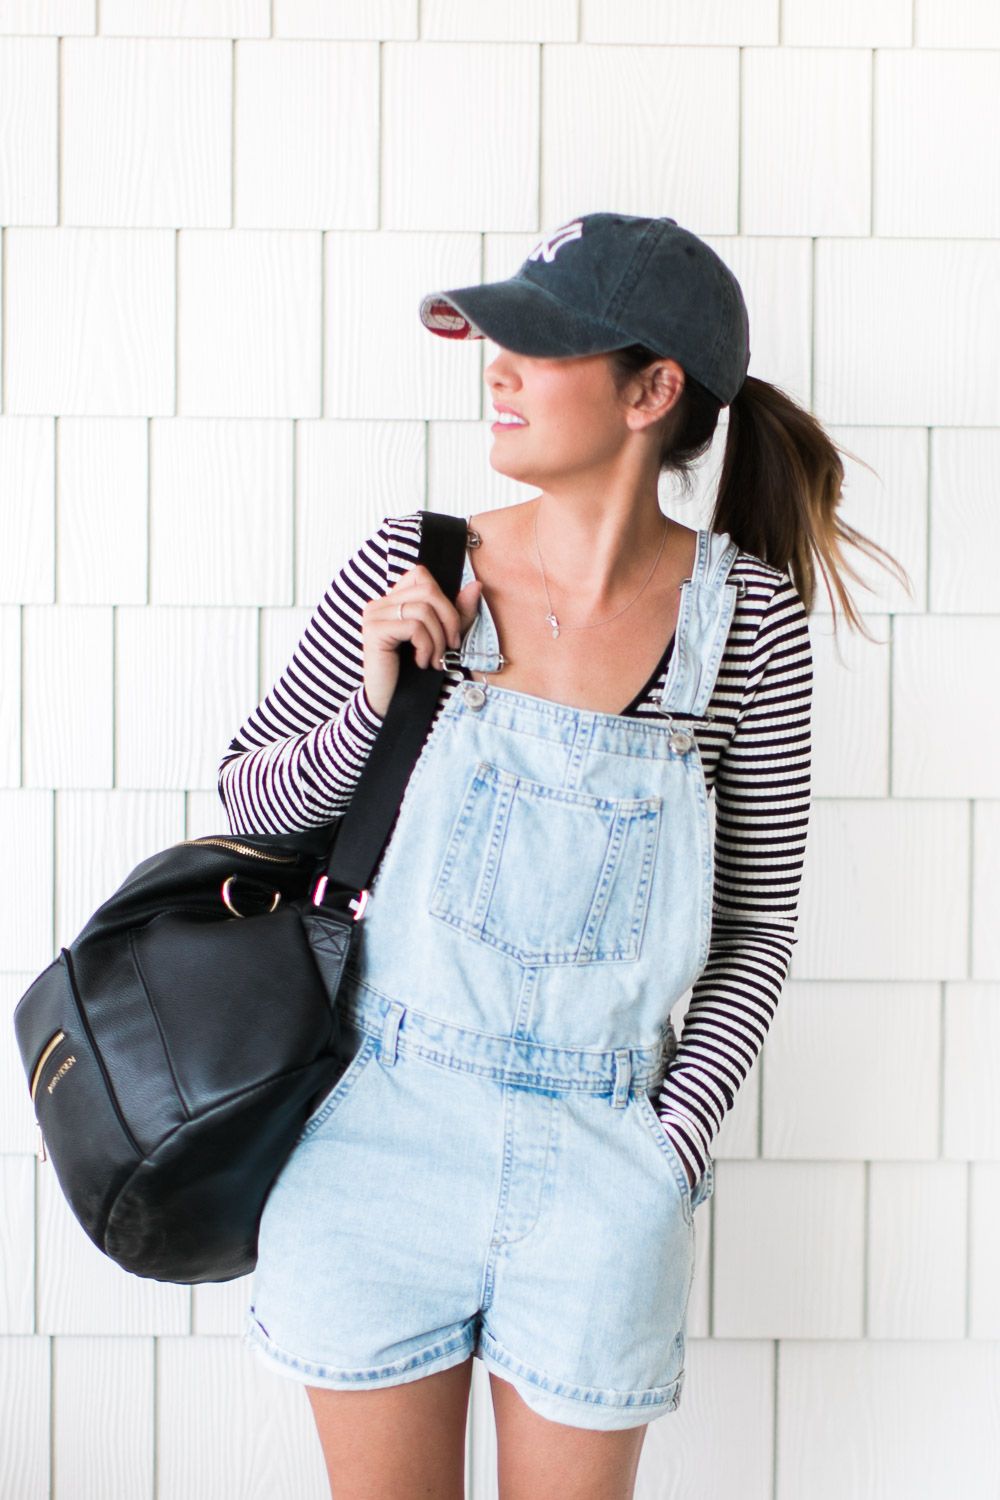 Easy and Effortless Summer Style with
Short Overalls